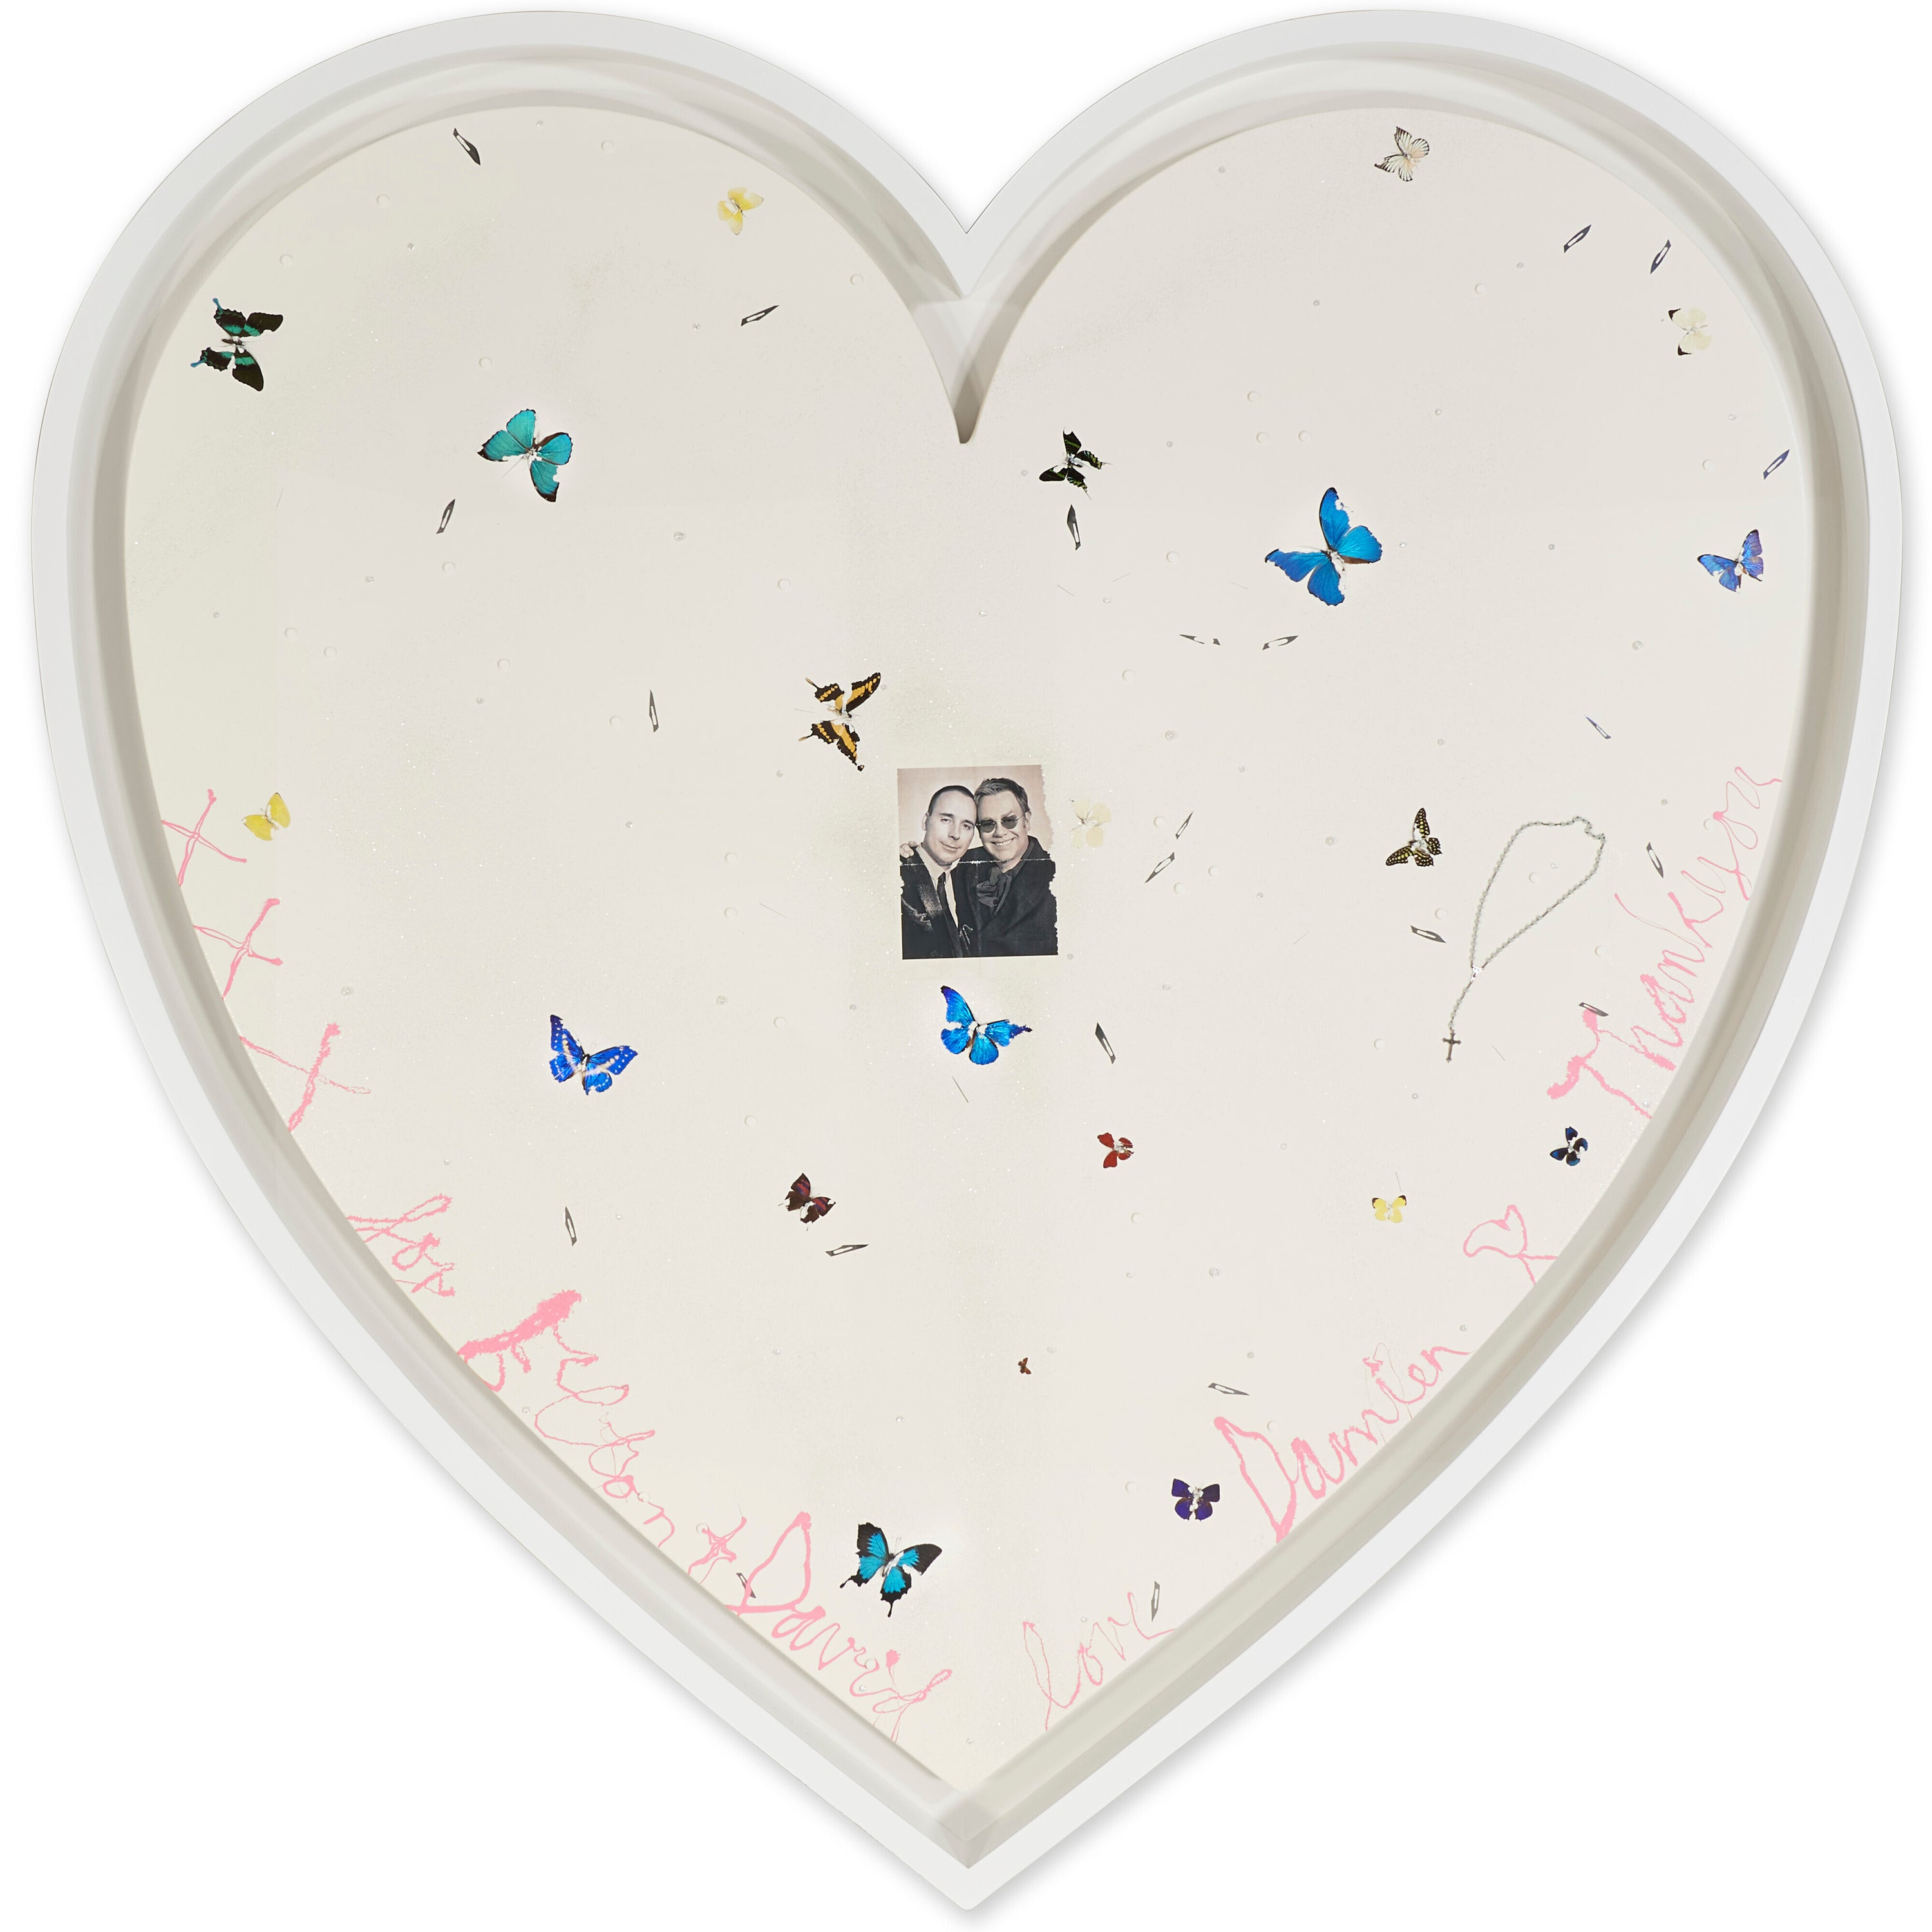 A custom Damien Hirst painting titled Your Song , signed and inscribed “xxx for Elton + David love Damien”, was gifted to the couple by the artist in 2008 and has an estimated price tag of $350,000 to $450,000 (£280,000 to £360,000)